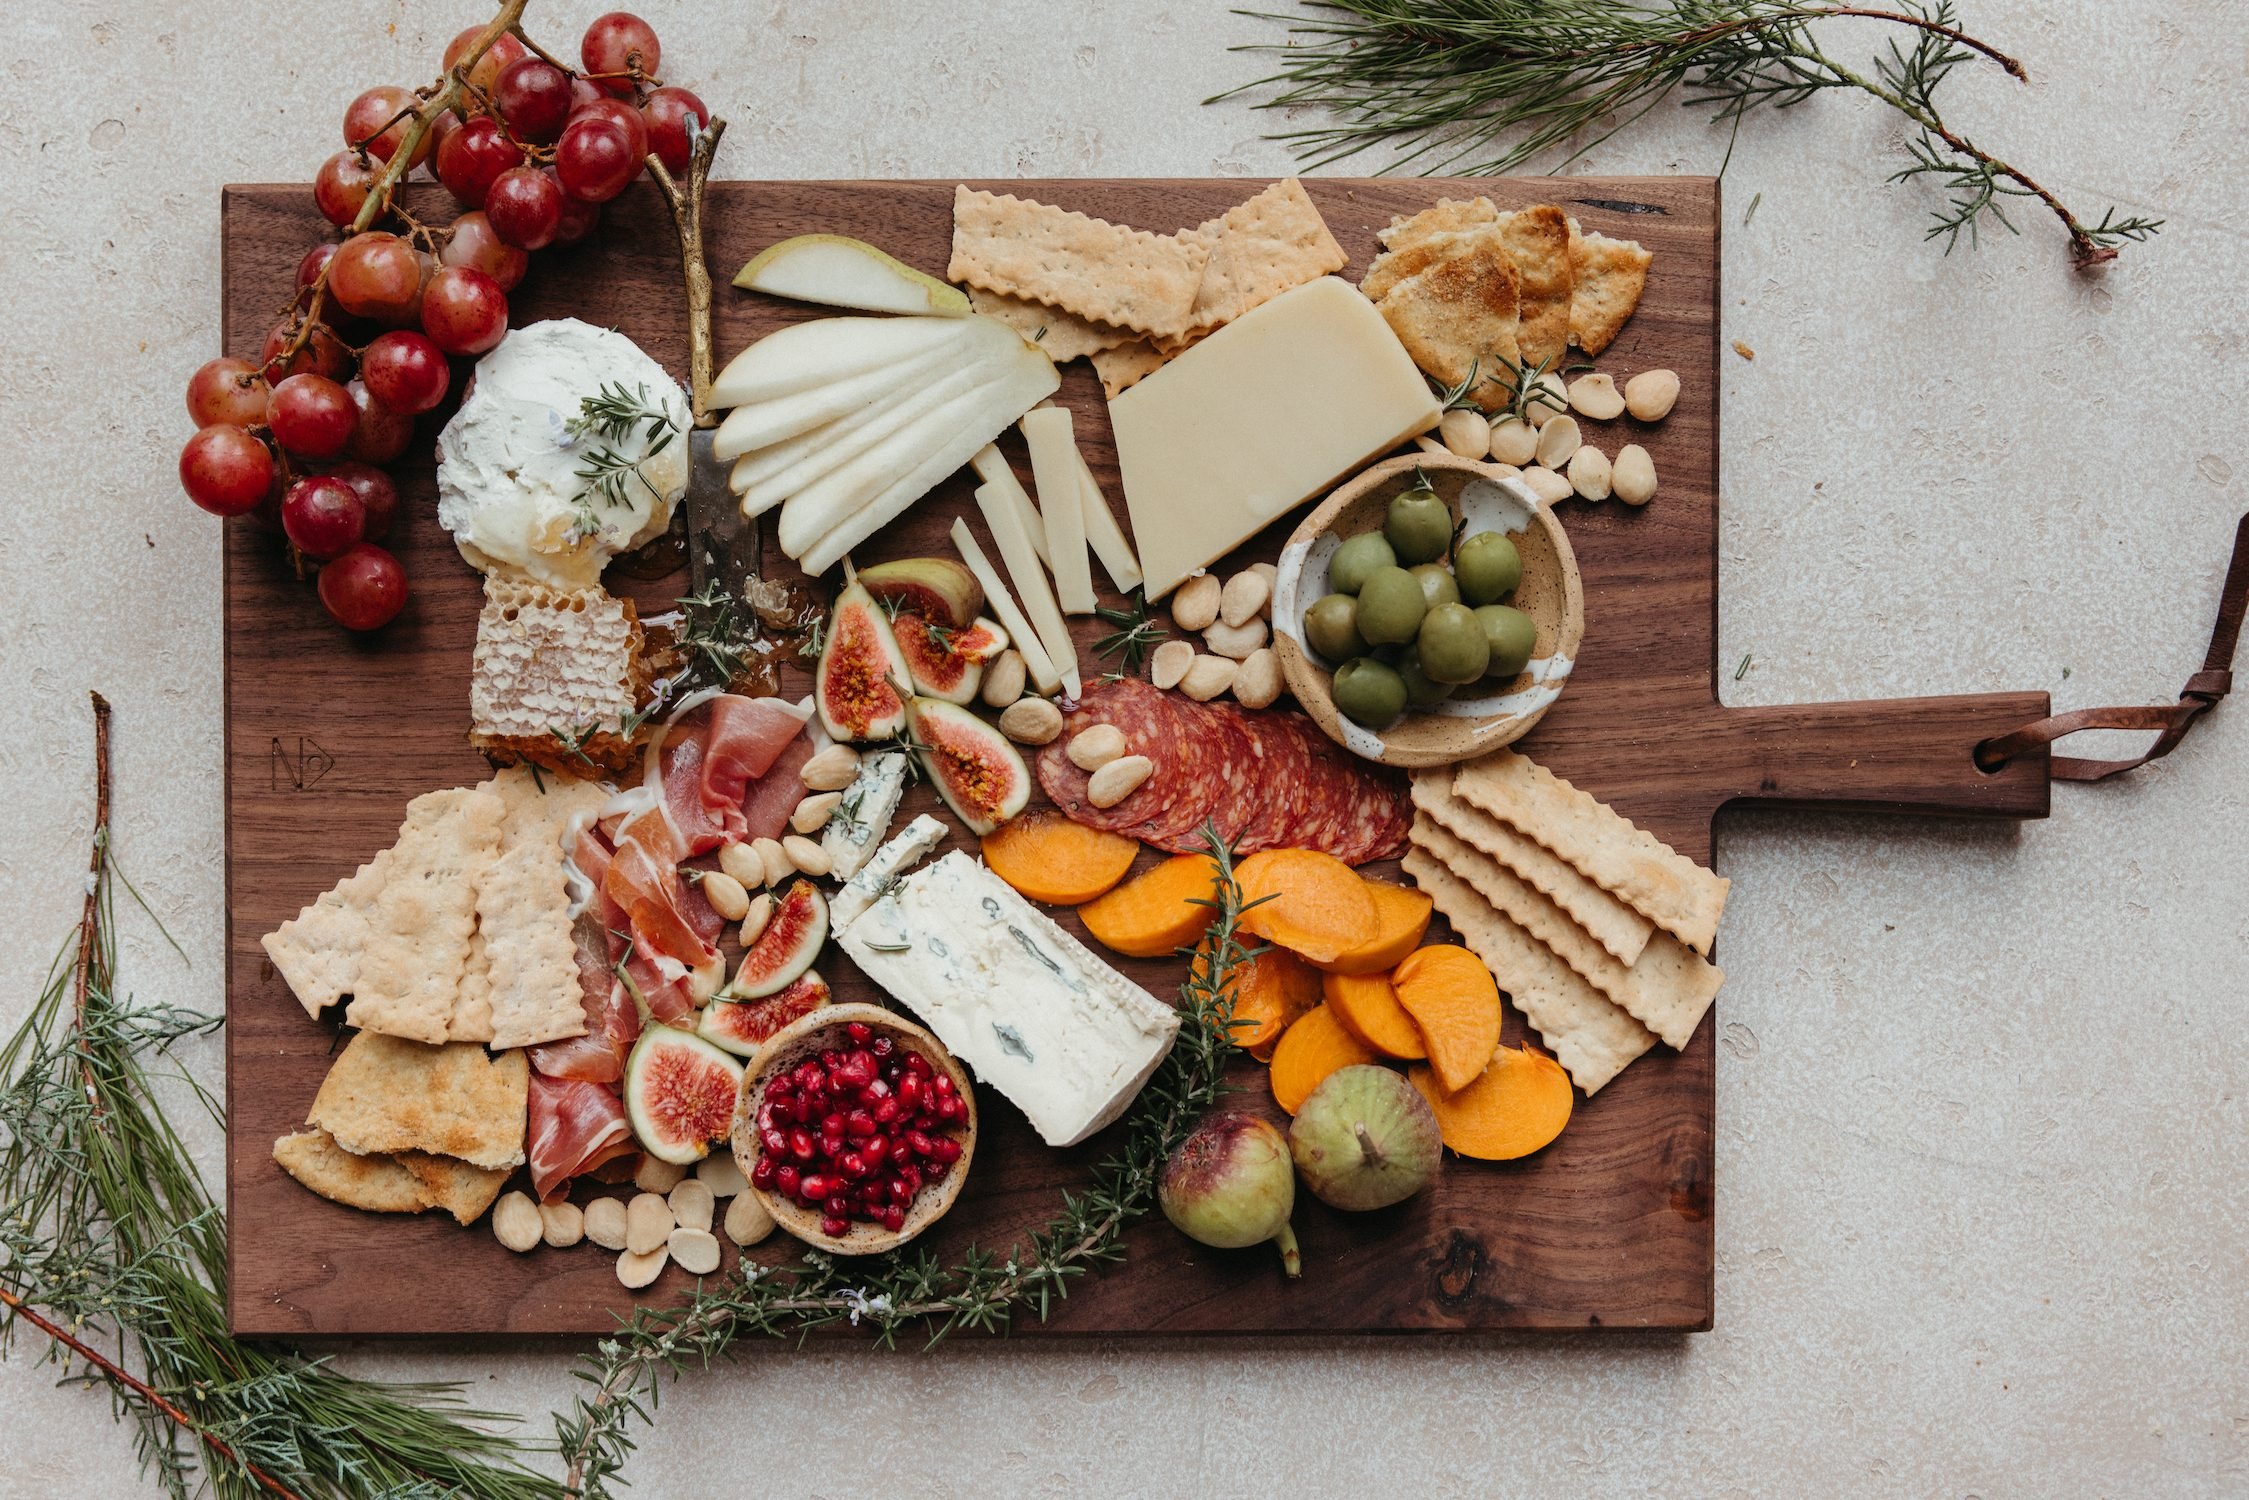 How to Make a Holiday Charcuterie Board